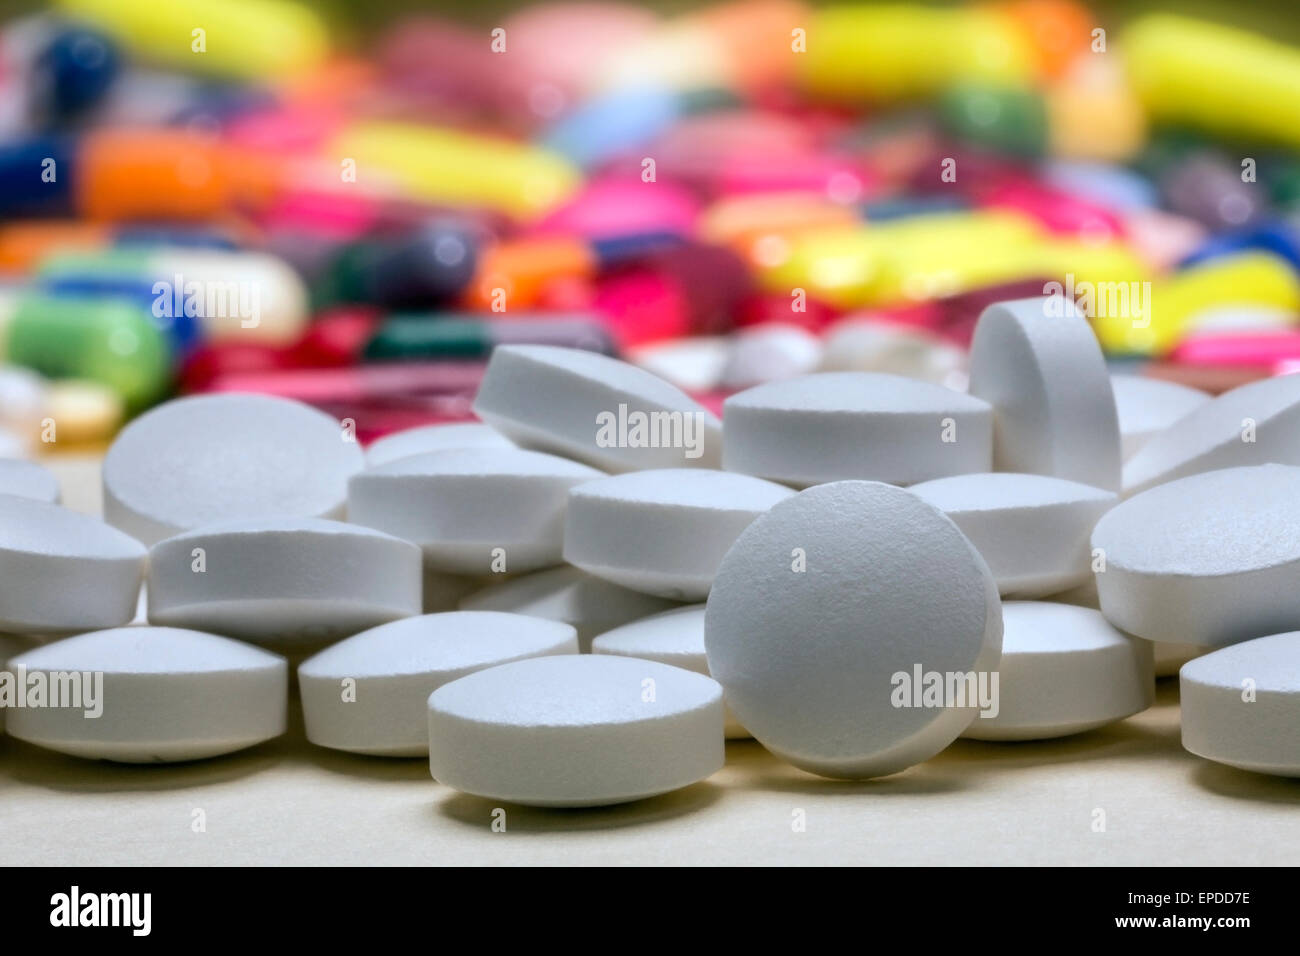 Medicine - pills and tablets used in the treatment of illness and disease. Stock Photo